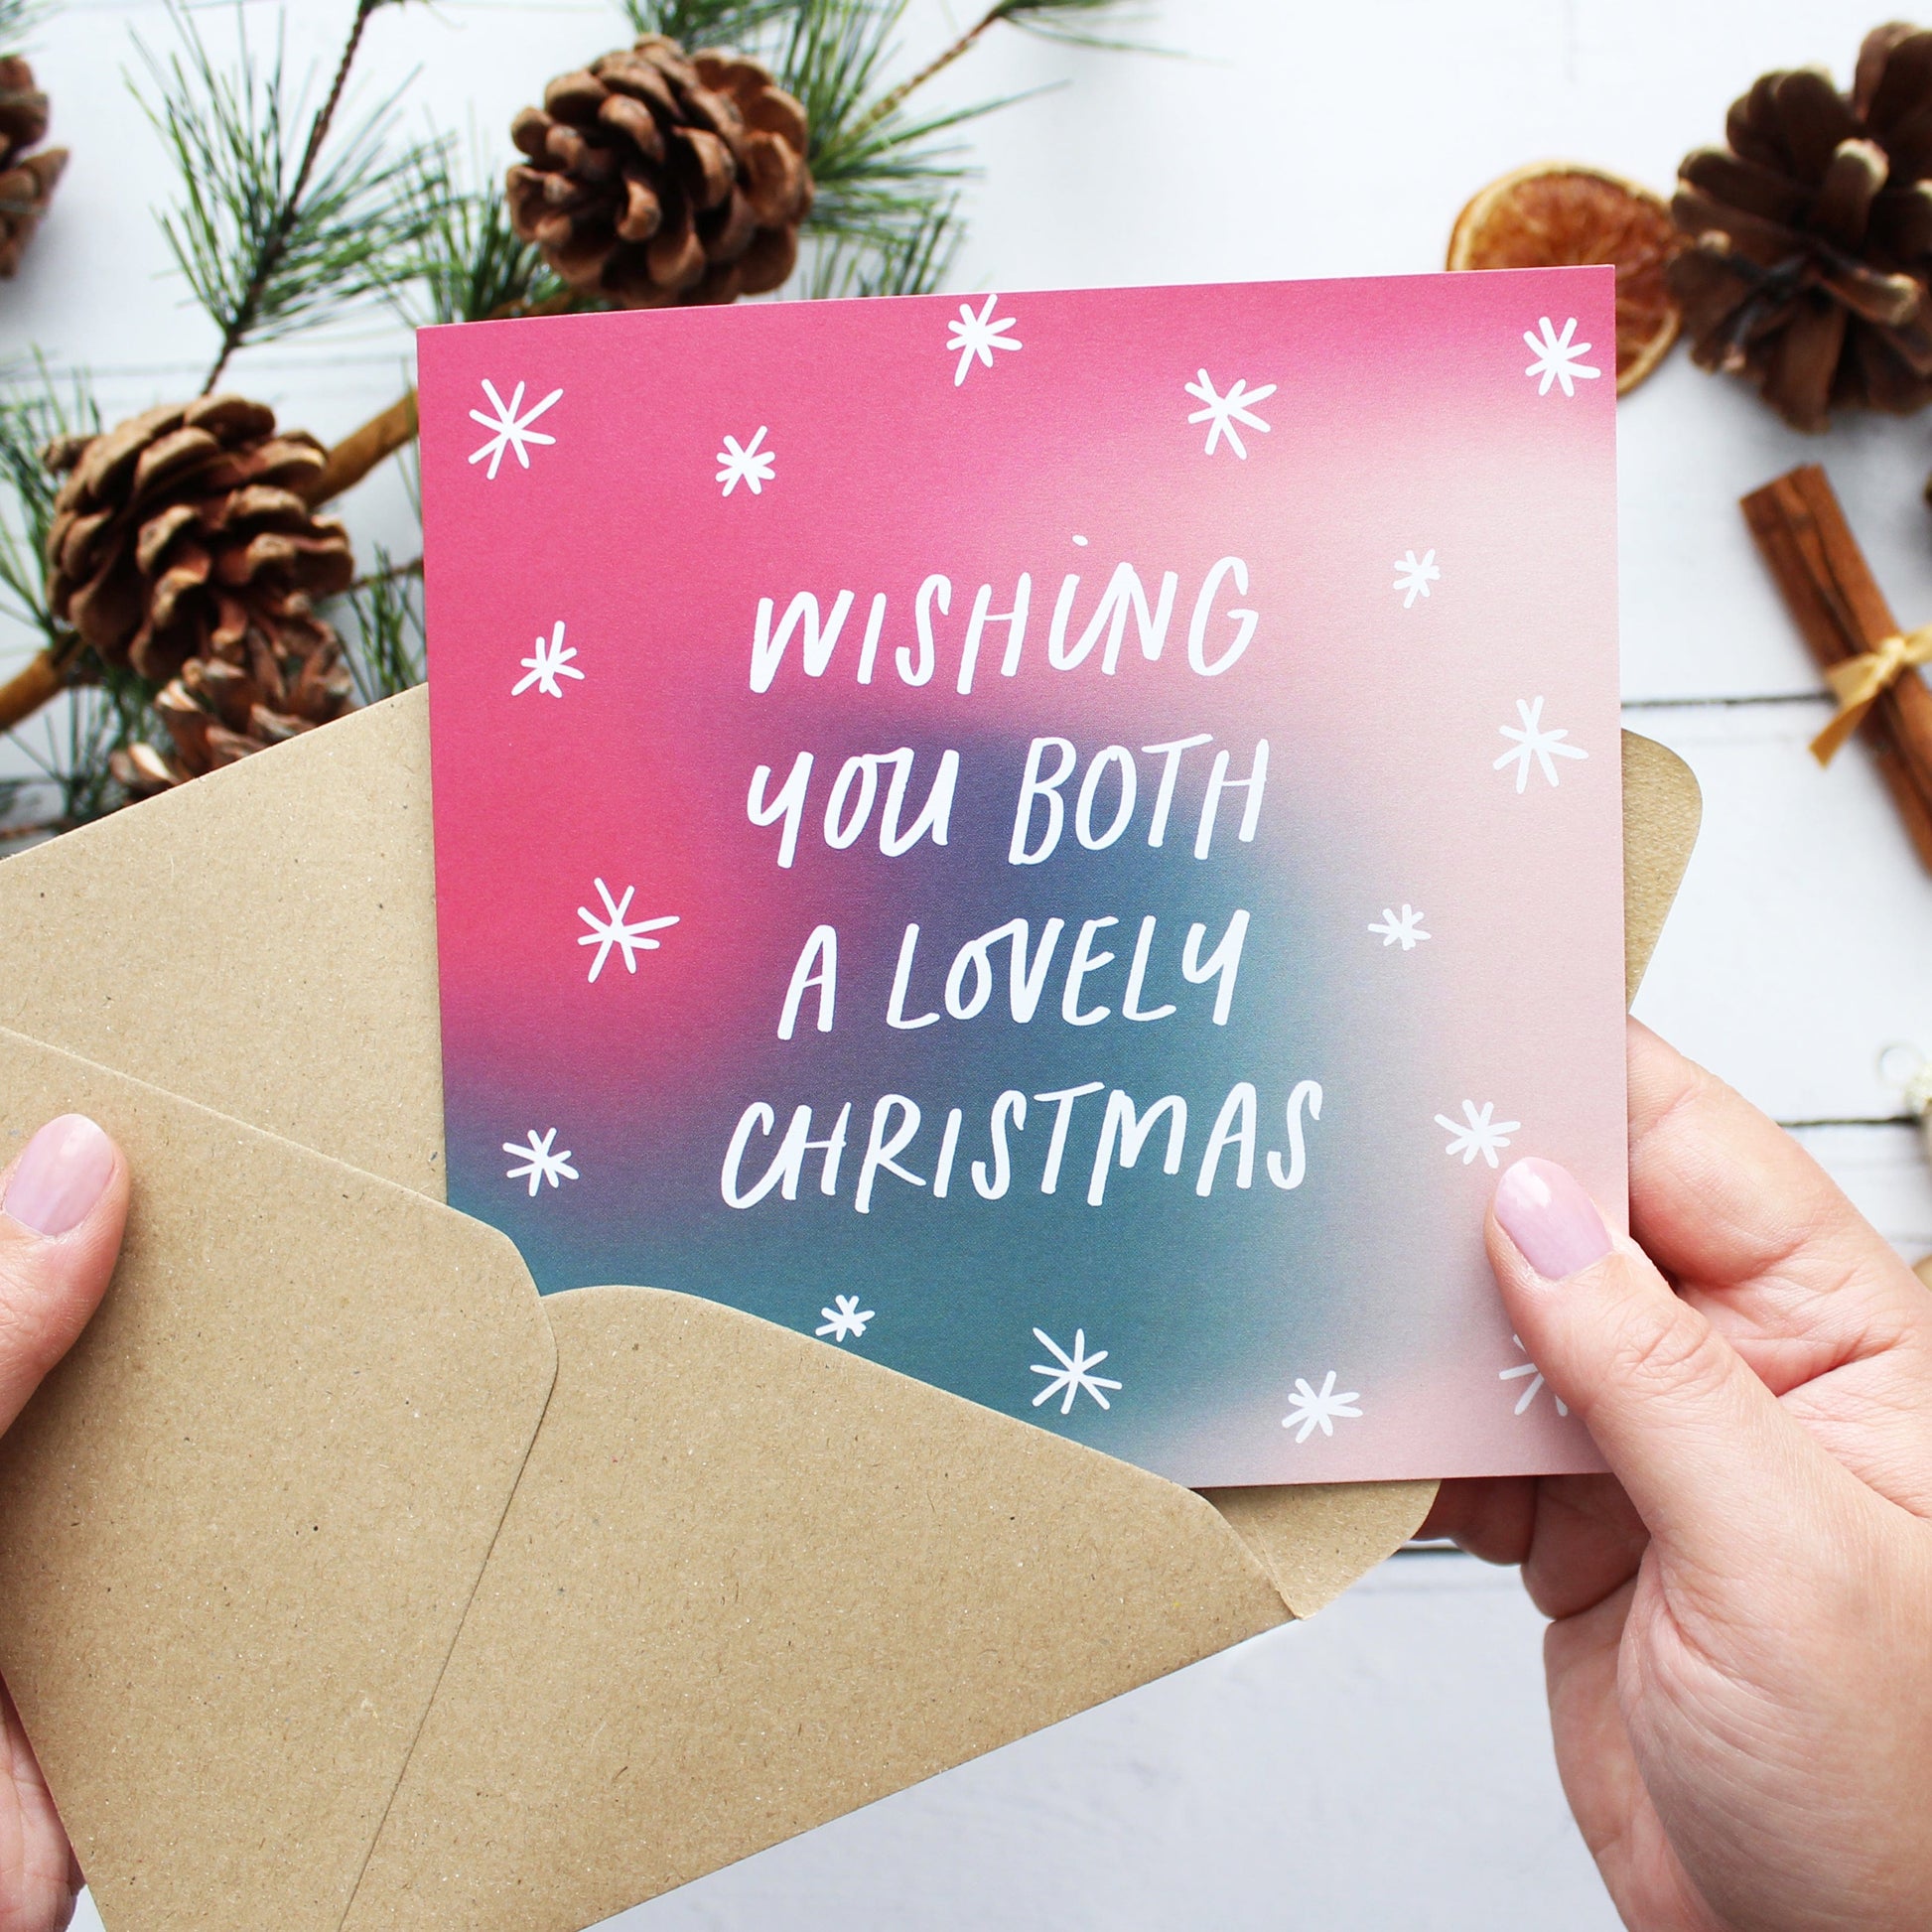 Wishing you both a lovely Christmas card from Purple Tree Designs